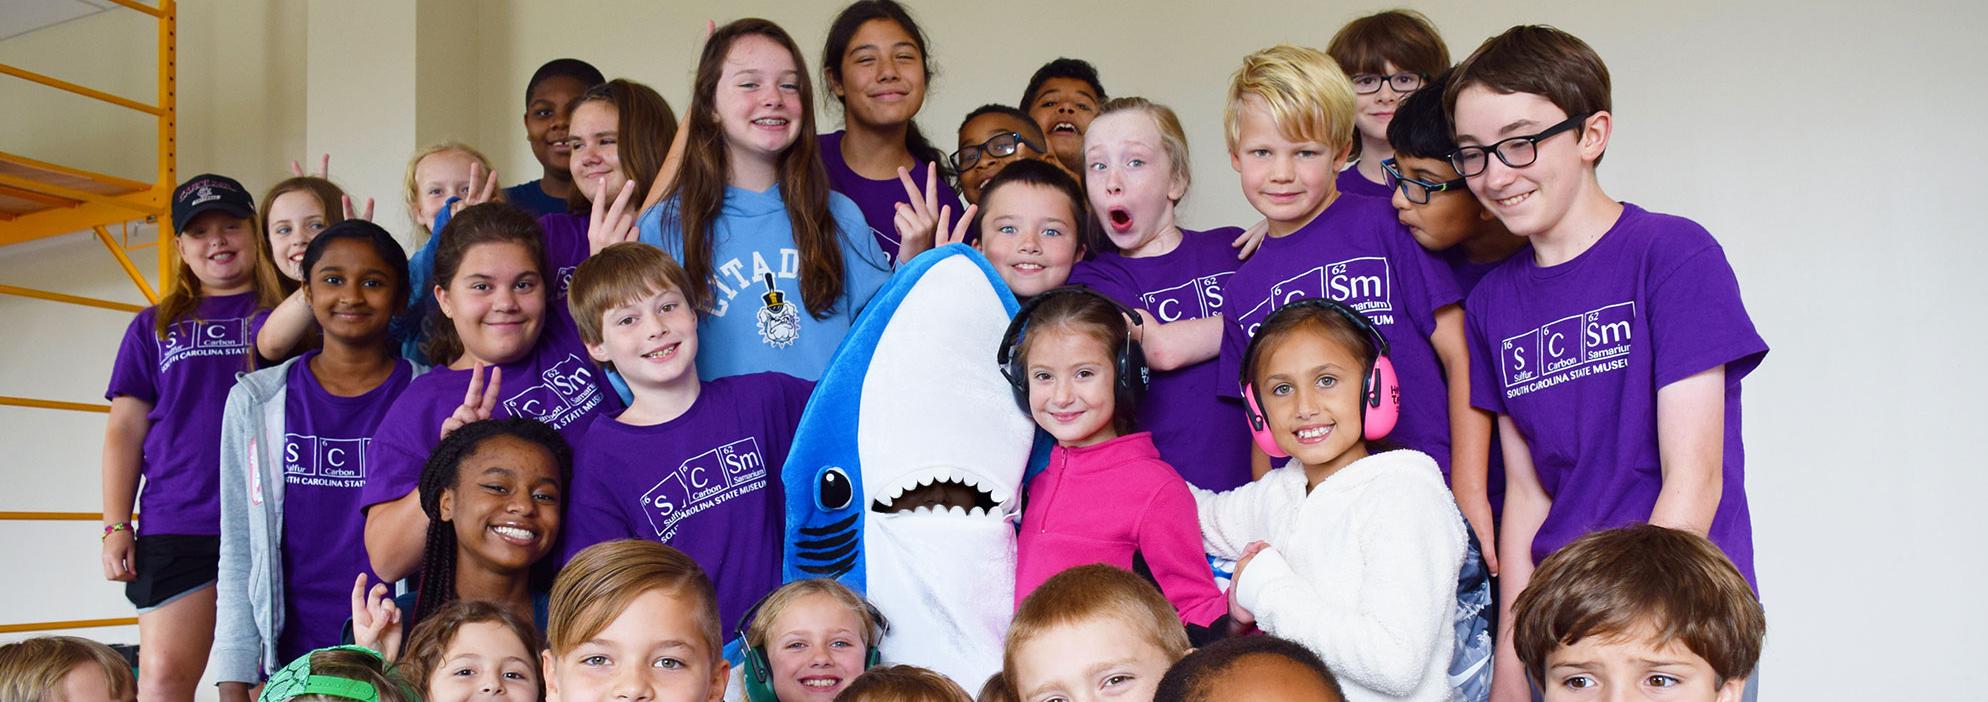 Large group of kids aged 6-12 wearing purple SCSM camp shirts posing with an educator in a shark mascot costume.